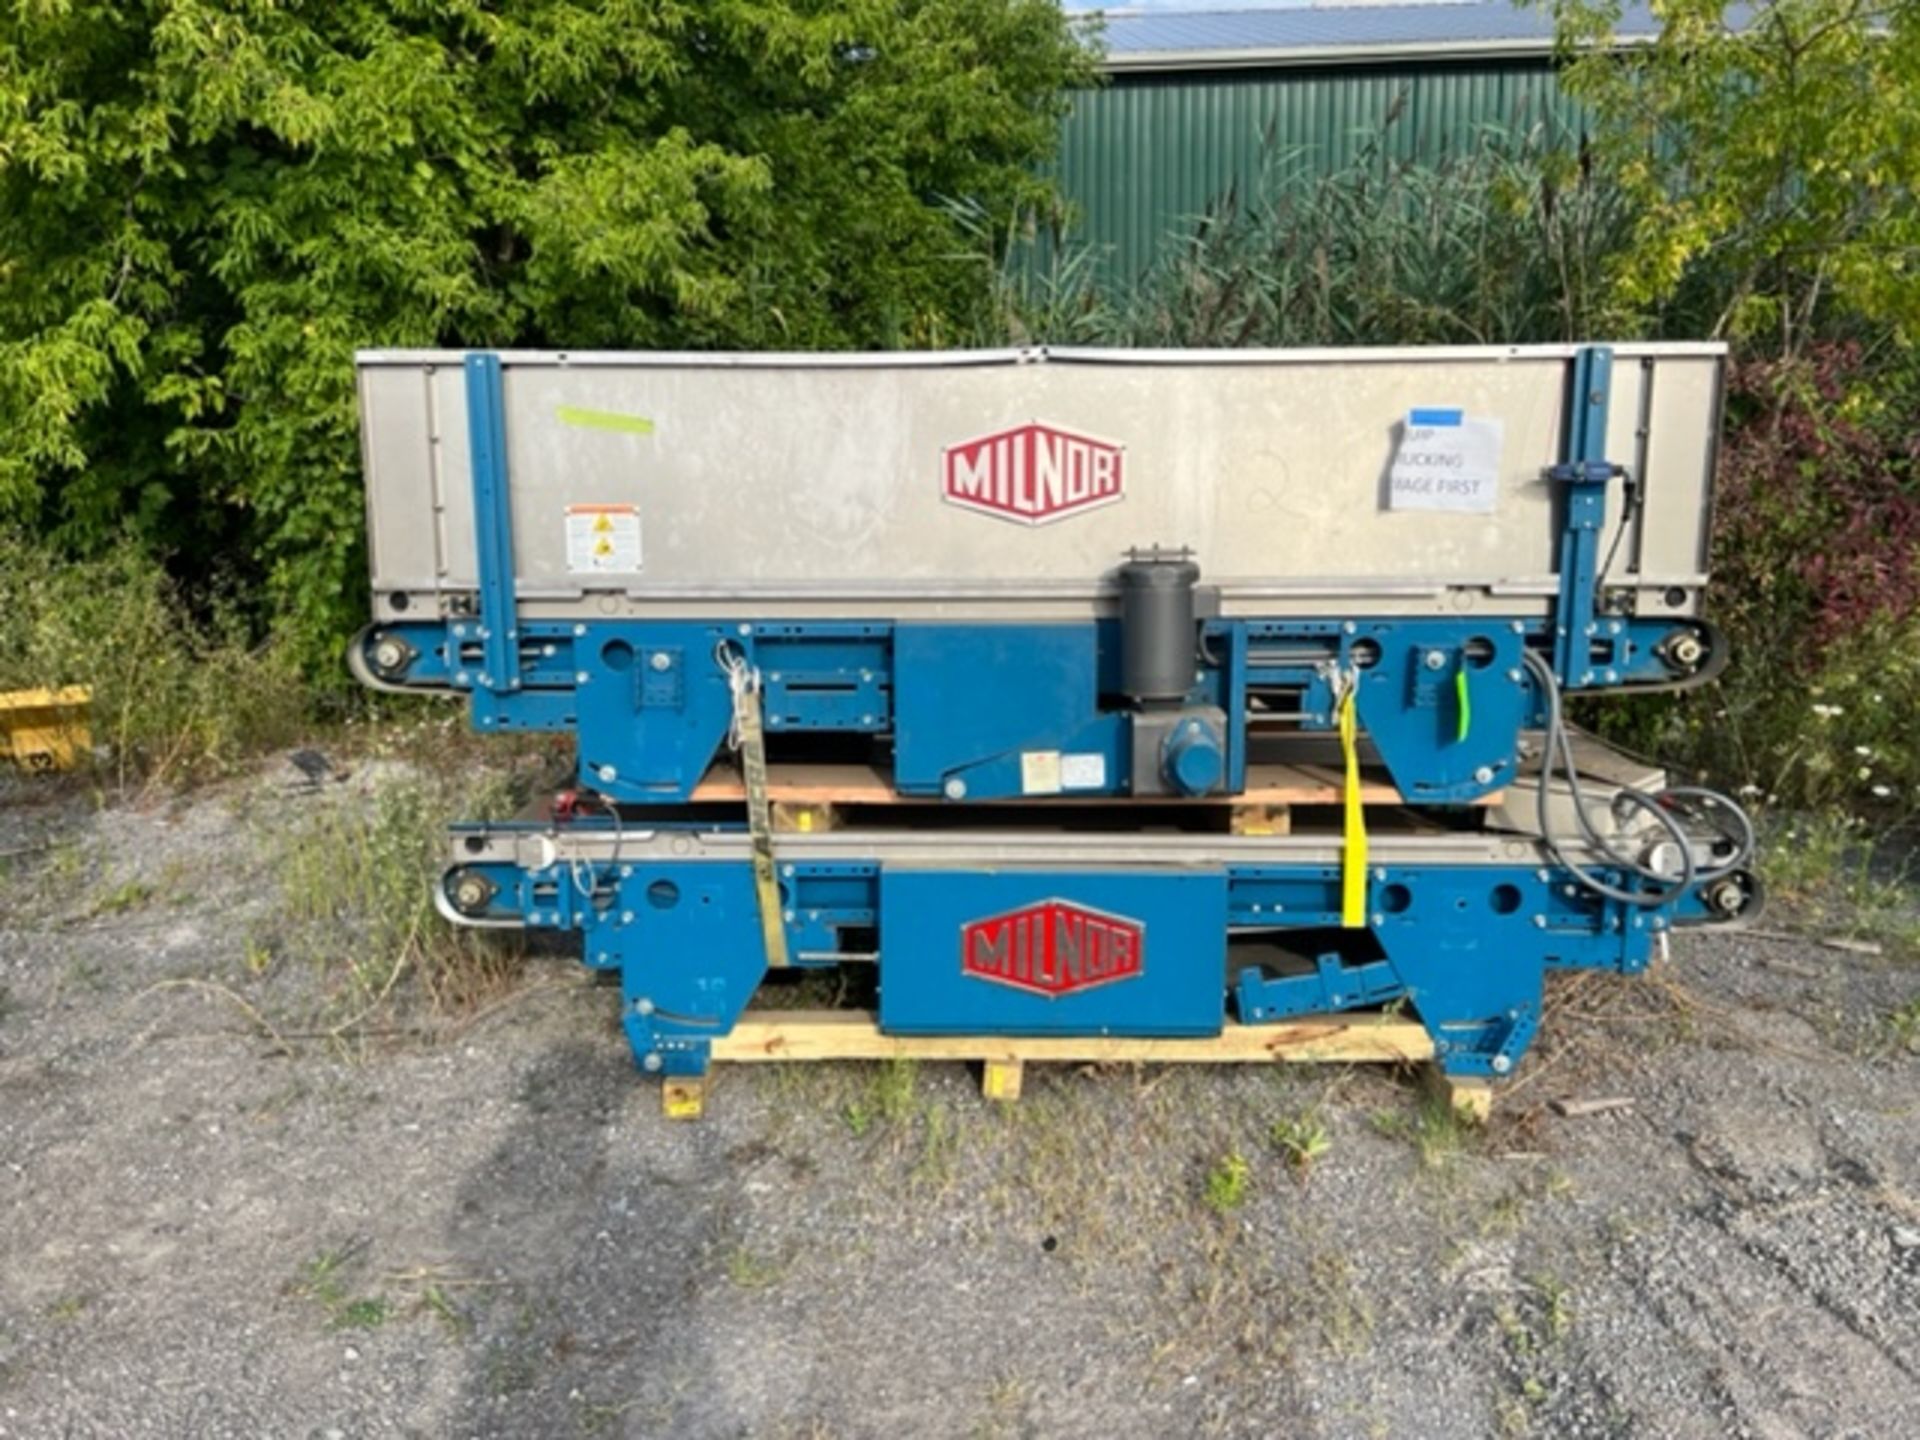 Lot of 2 (2 units) 120" x 48" Milnor Power Conveyors - new in 2014 MINT UNITS never used